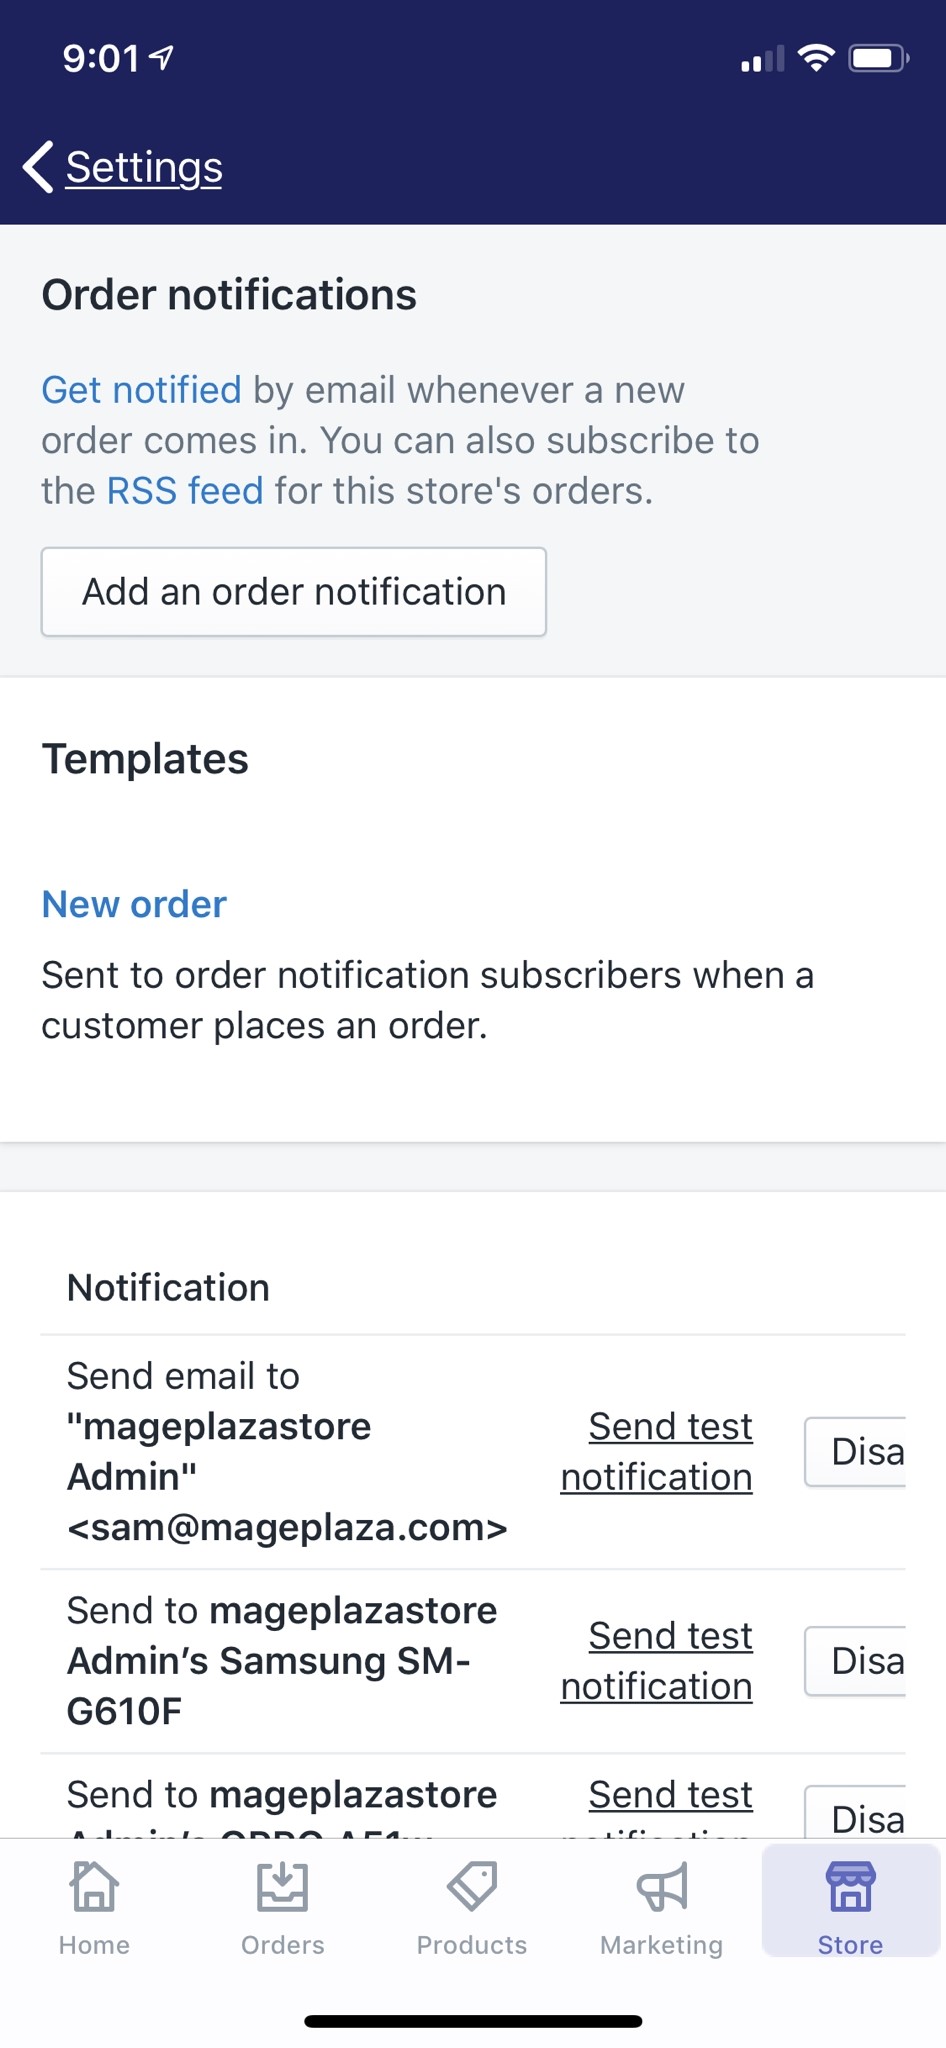 How to delete an order notification